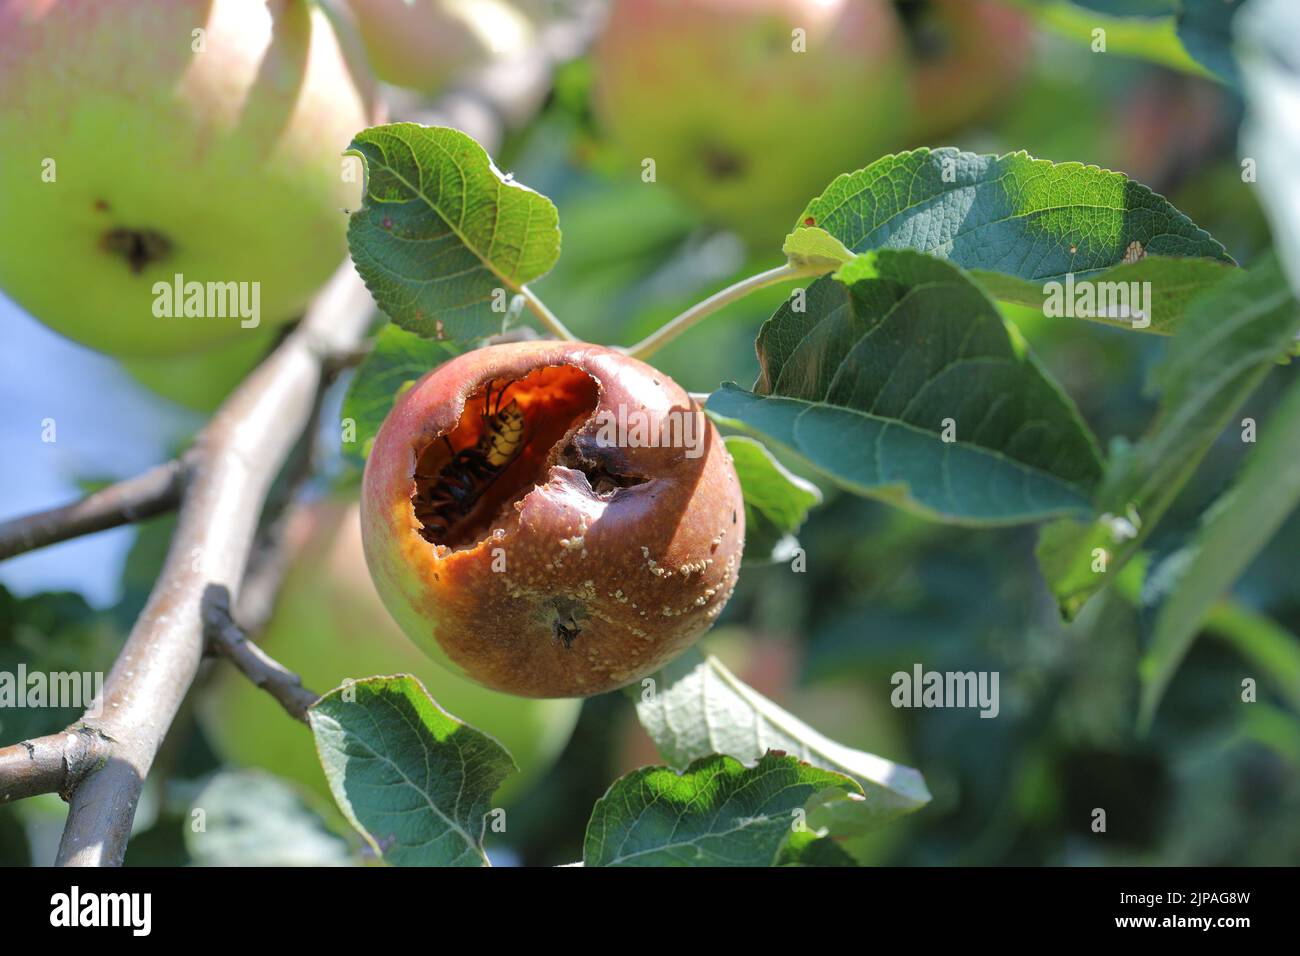 Malus domestica apple with brown rot (Monilinia laxa or monilinia fructagena) on the branch in orchard. Stock Photo